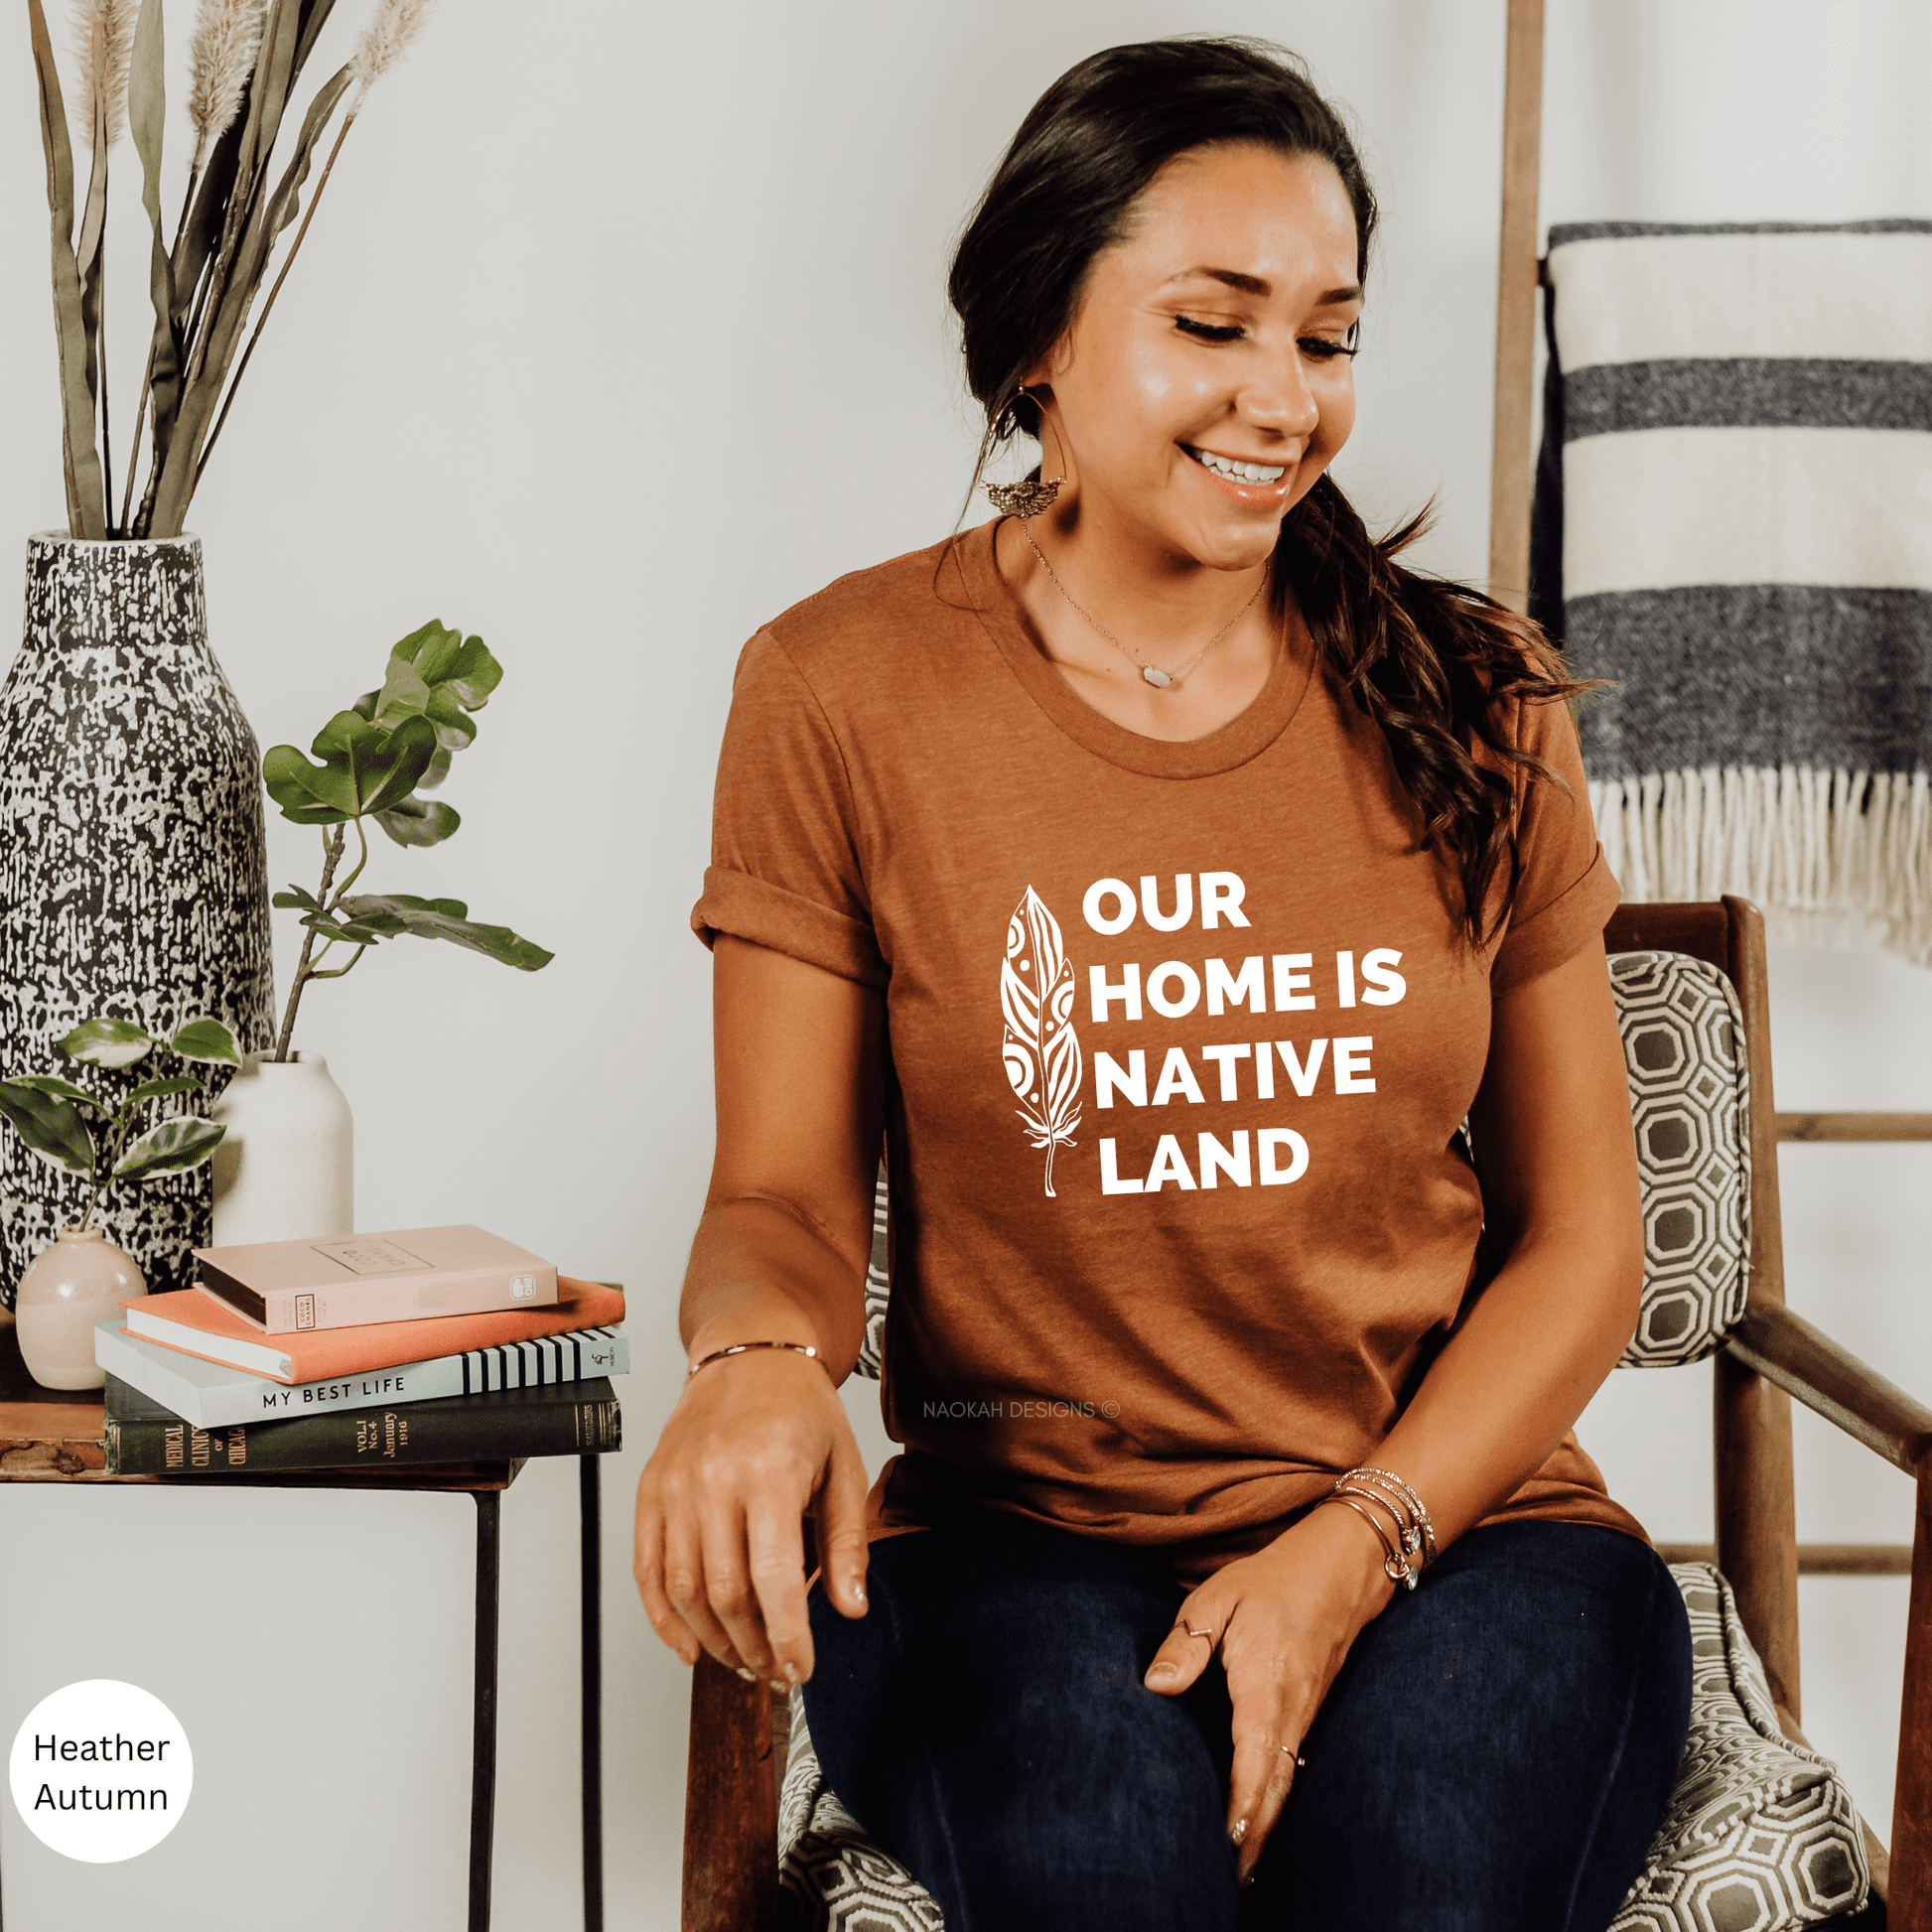 Our home is native land shirt, We are on Indigenous land t-shirt, this is native land shirt, Land Back shirt, land back indigenous shirt, native land shirt, no one is illegal on native land shirt, Indigenous pride, native pride, resistance, decolonize shirt, indigenous lives matter shirt, decolonize education shirt, Native shirt, Equal Rights Shirt, Equality, Indigenous AF, Phenomenally Indigenous T-Shirt